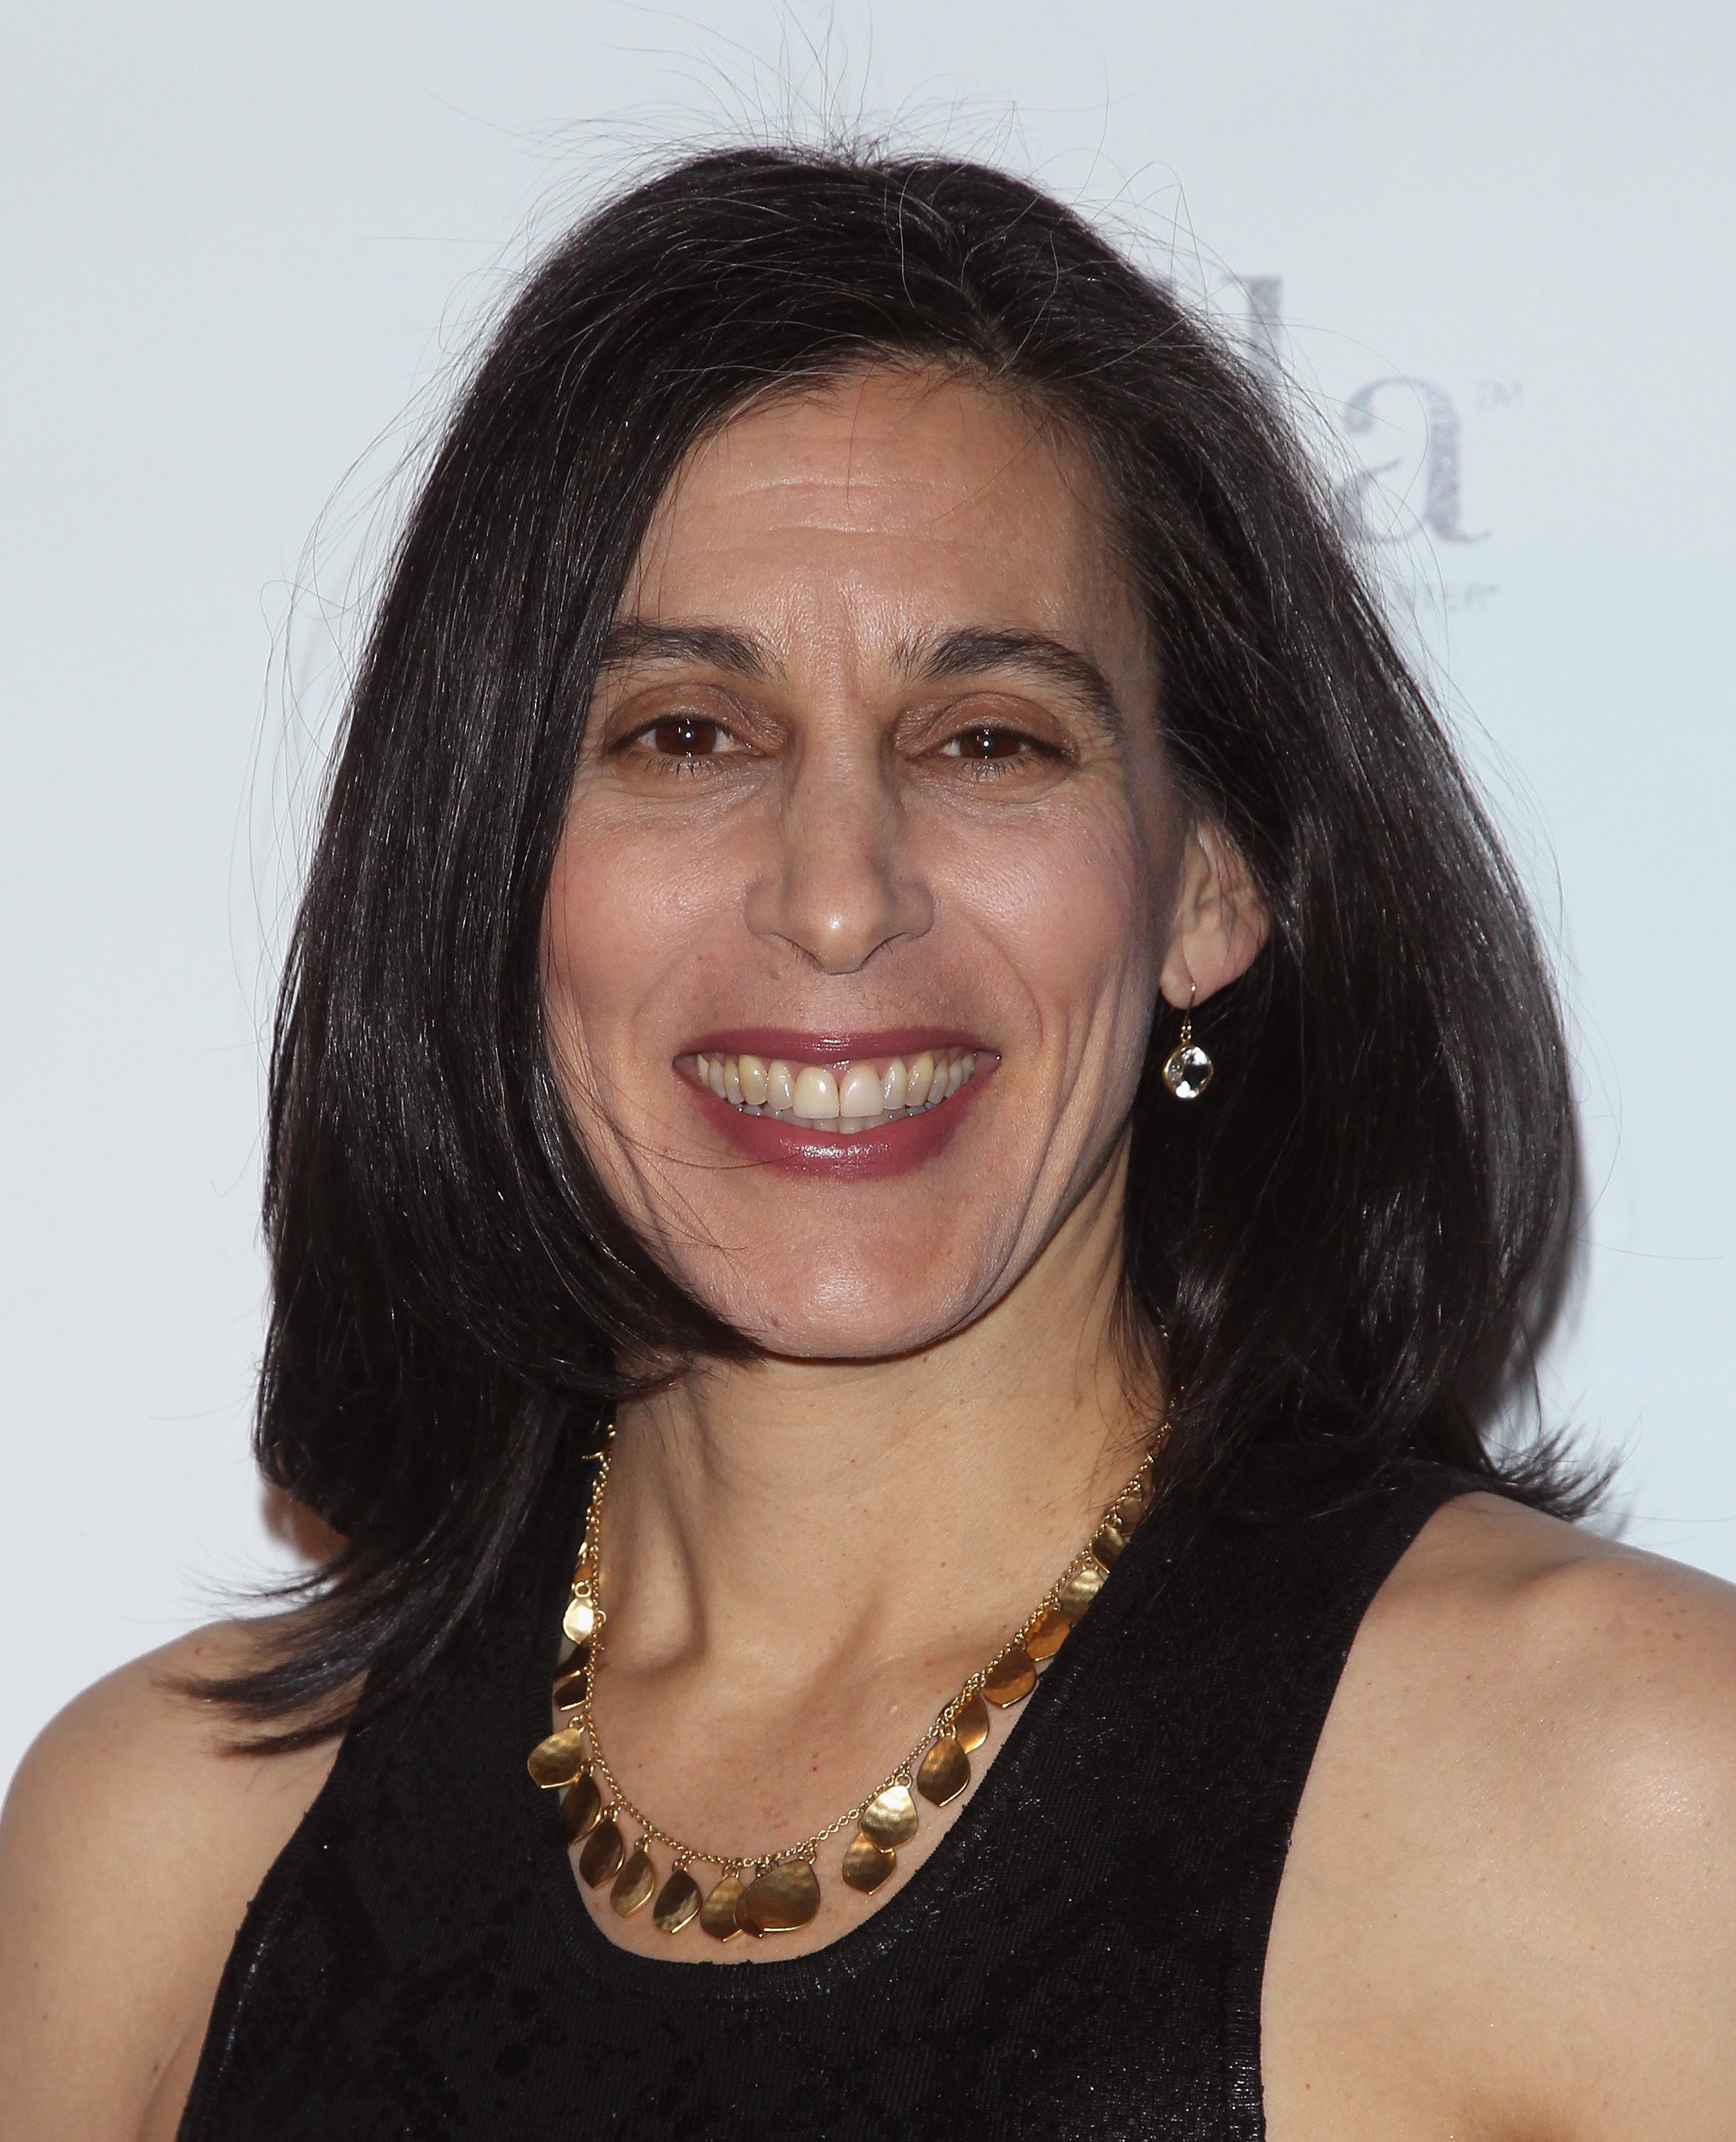 Beatrice Alda at the 2014 "CMEE In The City" fundraiser at Riverpark, 2014, New York City. | Photo: Getty Images